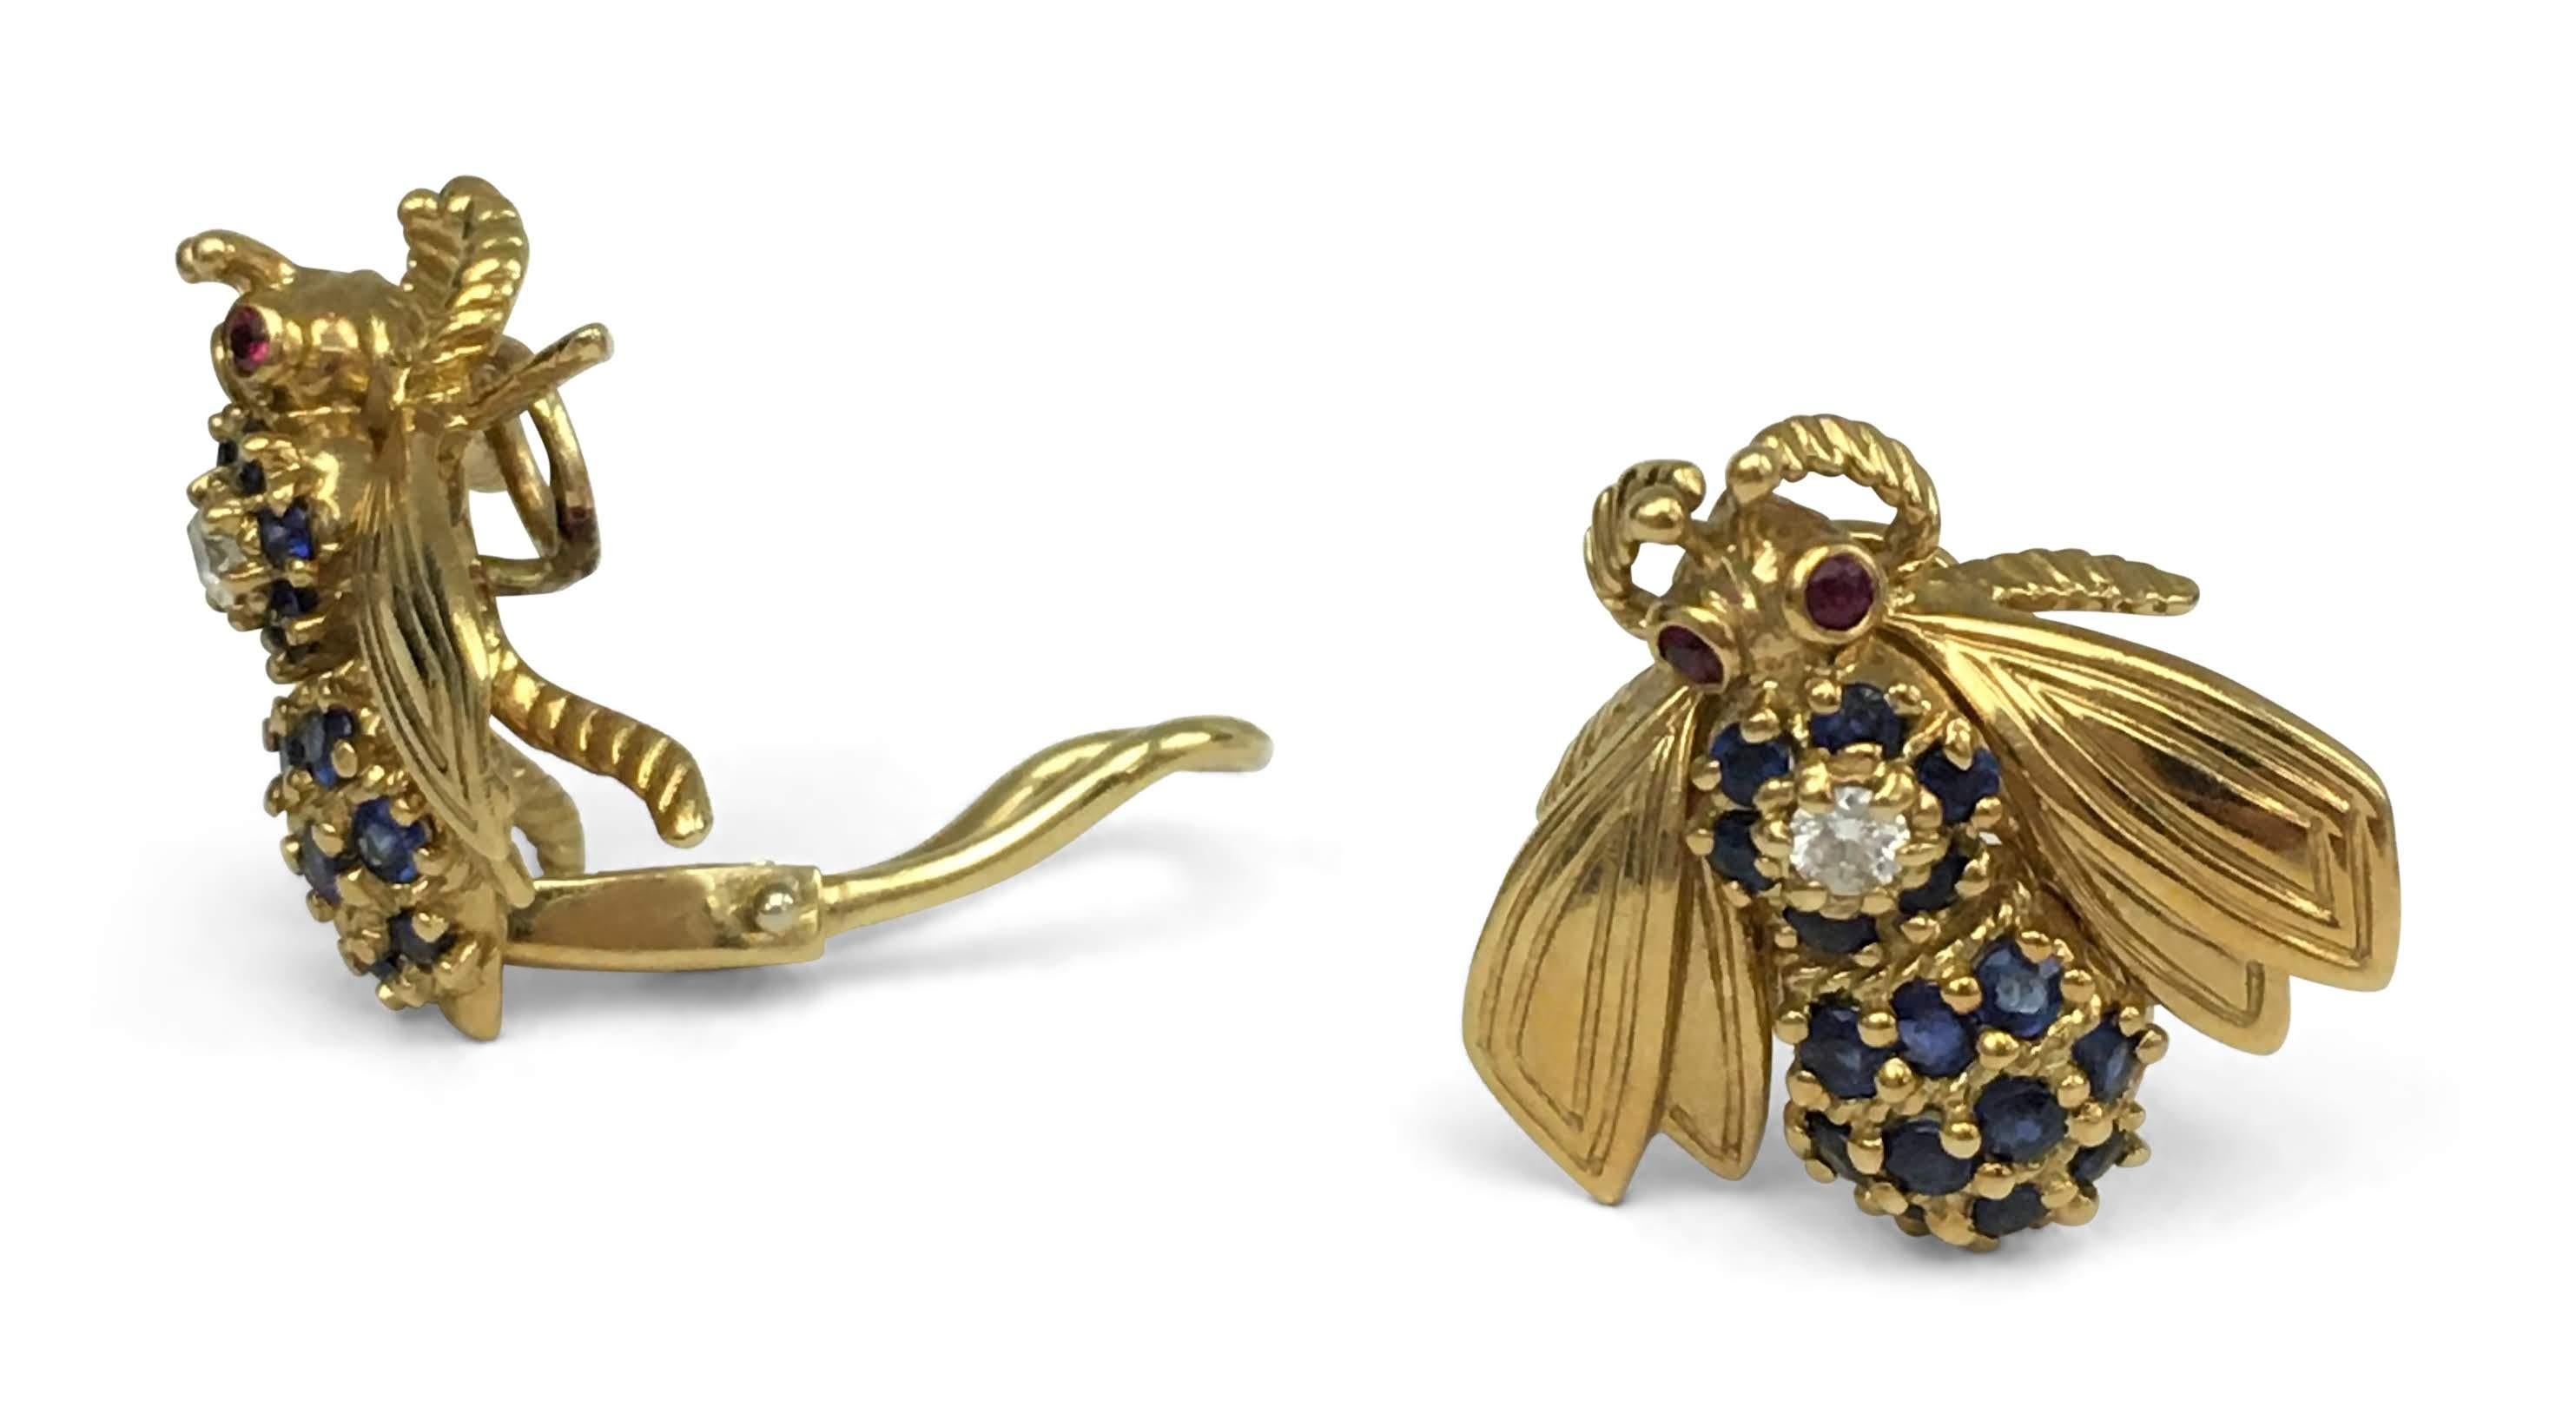 Vintage Tiffany & Co. bumblebee earrings crafted in 18 karat yellow gold featuring well matched round cut blue sapphires (approx 1.30 cttw) with a round brilliant cut diamond weighing an estimated 0.10 carats total in the center. The bumblebees are